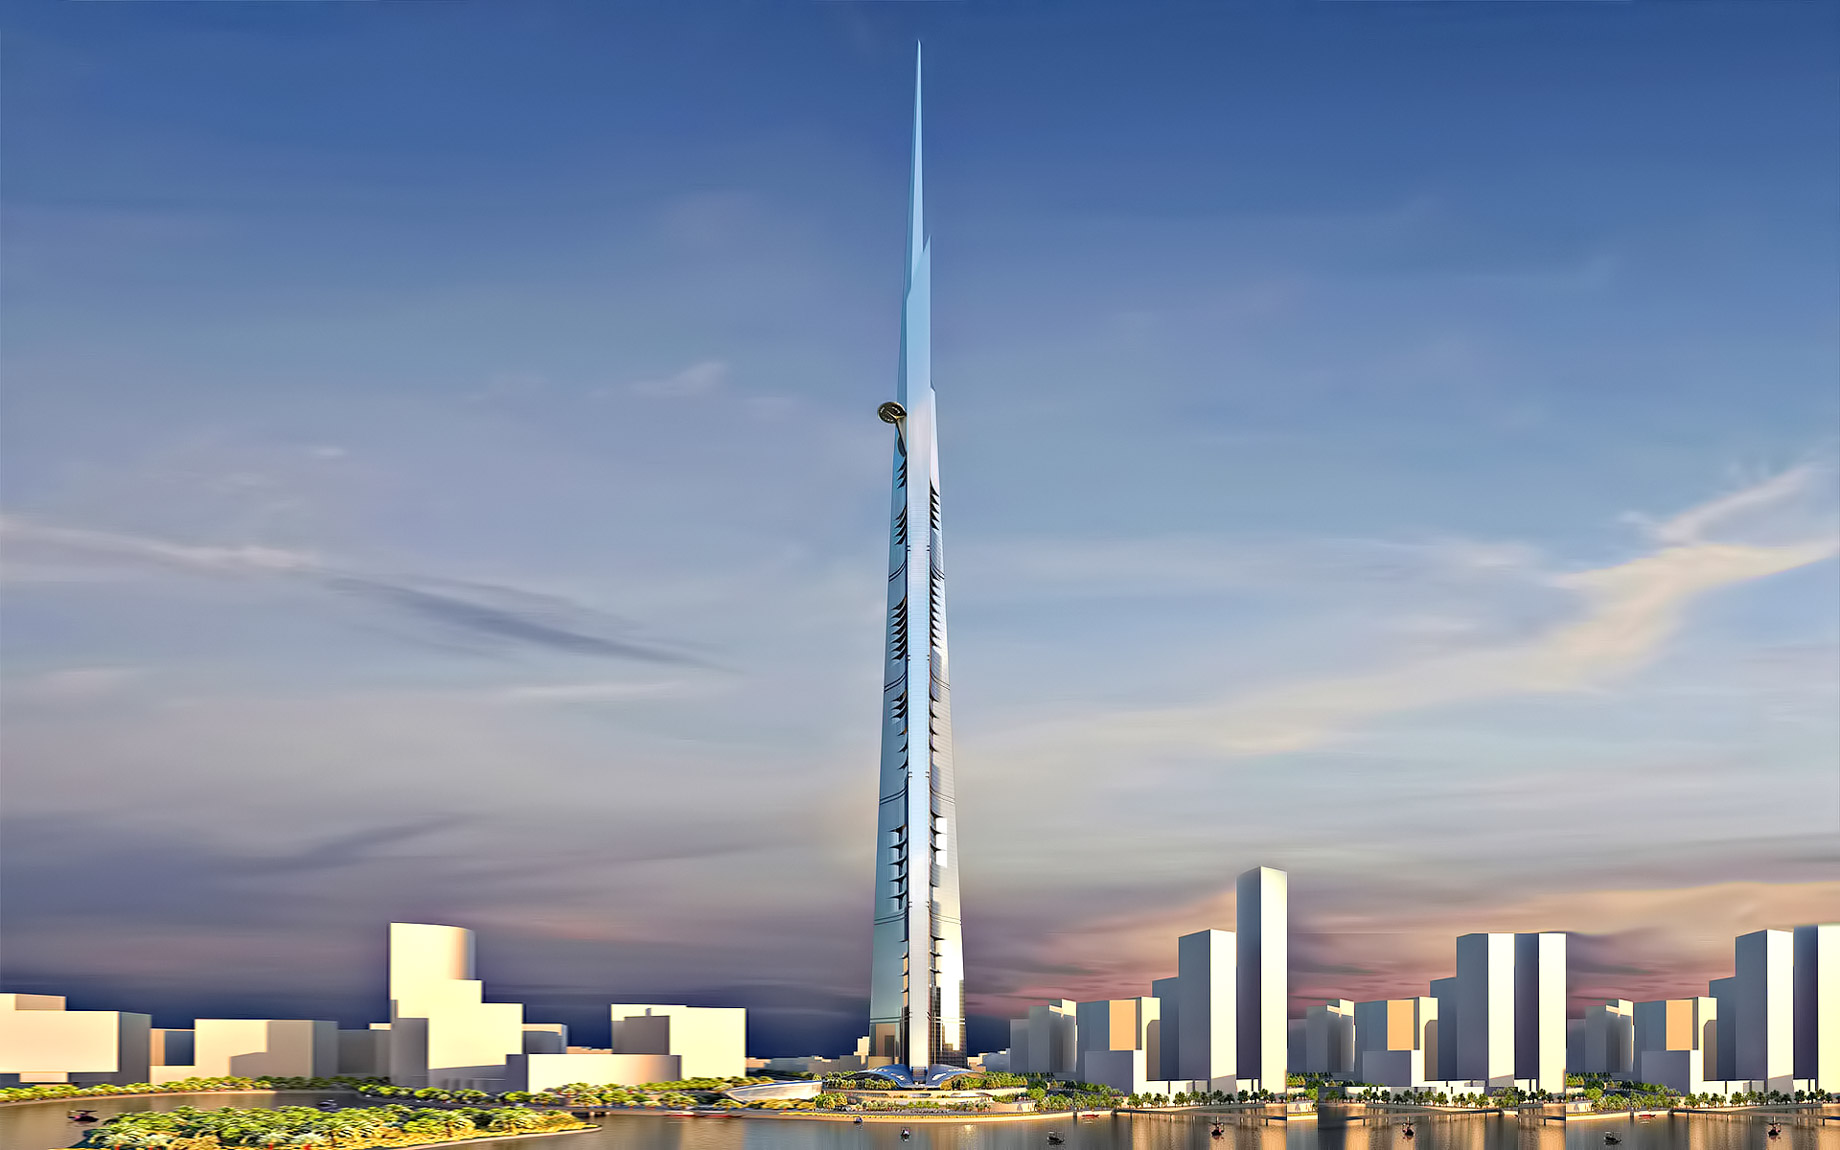 The Next Tallest Building in the World - Kingdom Tower in Jeddah, Saudi Arabia